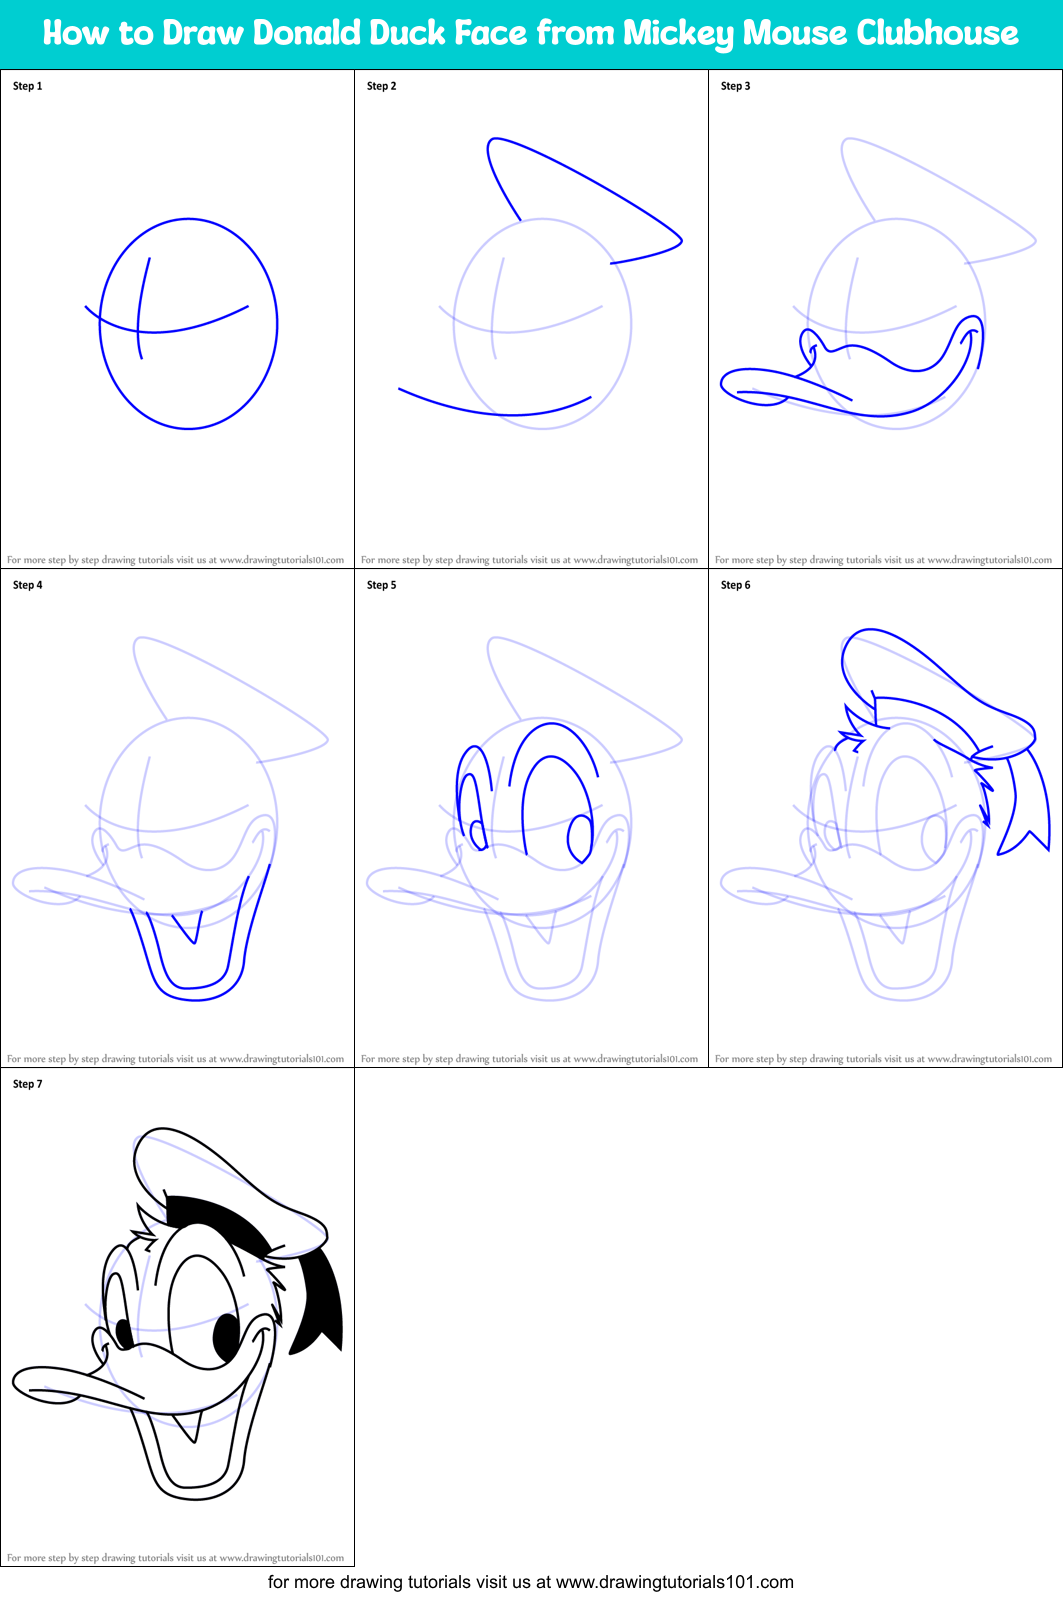 How to Draw Donald Duck Face from Mickey Mouse Clubhouse printable step